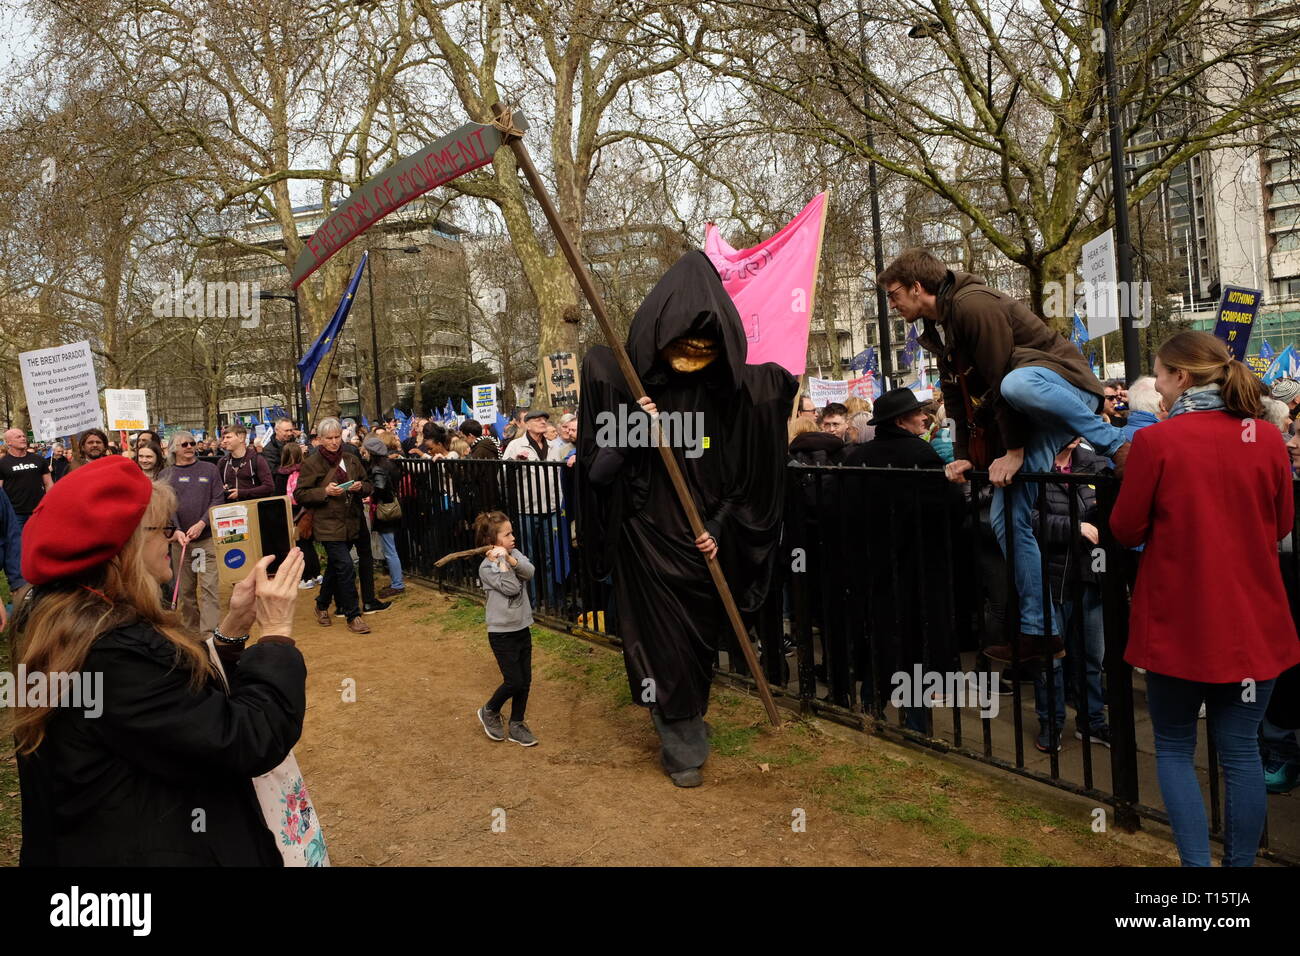 London, UK. 23rd Mar 2019. Remain supporters gathered in London and marched to Parliament Square demanding a second referendum on the issue of Brexit. The march was organized under the banner of People's Vote. Credit: Angus MacKinnon/Alamy Live News Stock Photo